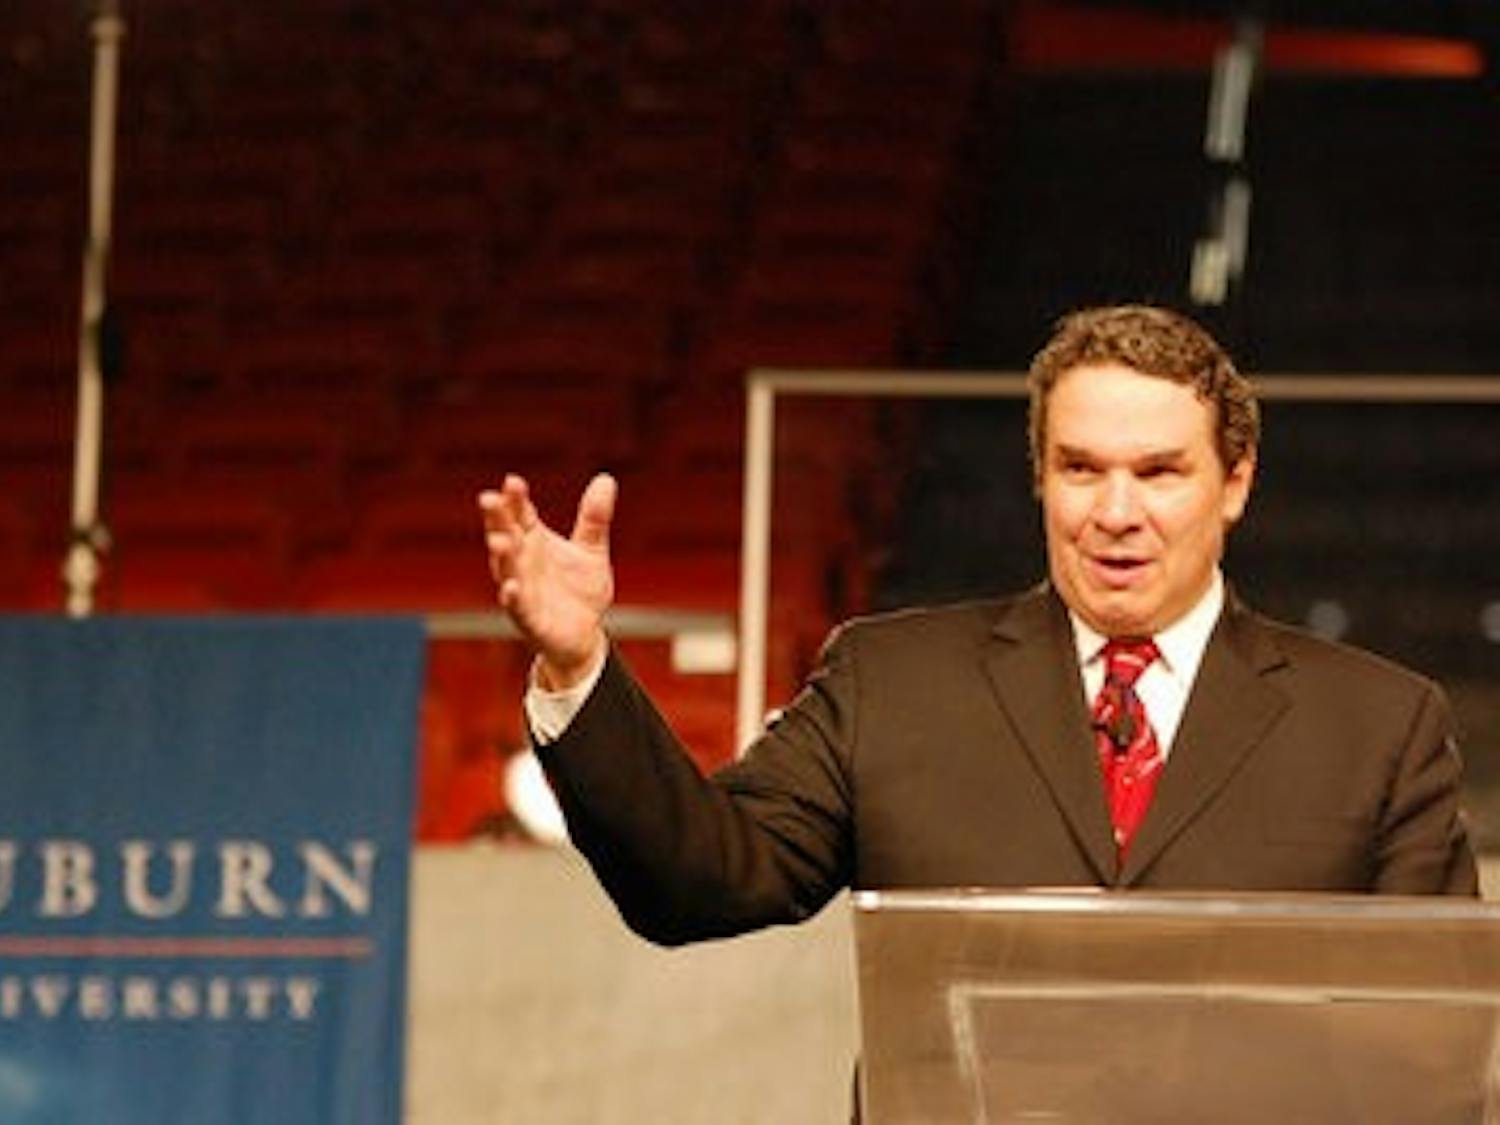 New York Times bestselling author Greg Mortenson, writer of "Three Cups of Tea: One Man's Mission to Promote Peace . . . One School at a Time," addresses the crowd at Auburn Arena Tuesday. (Charlie Timberlake / ASSISTANT PHOTO EDITOR)